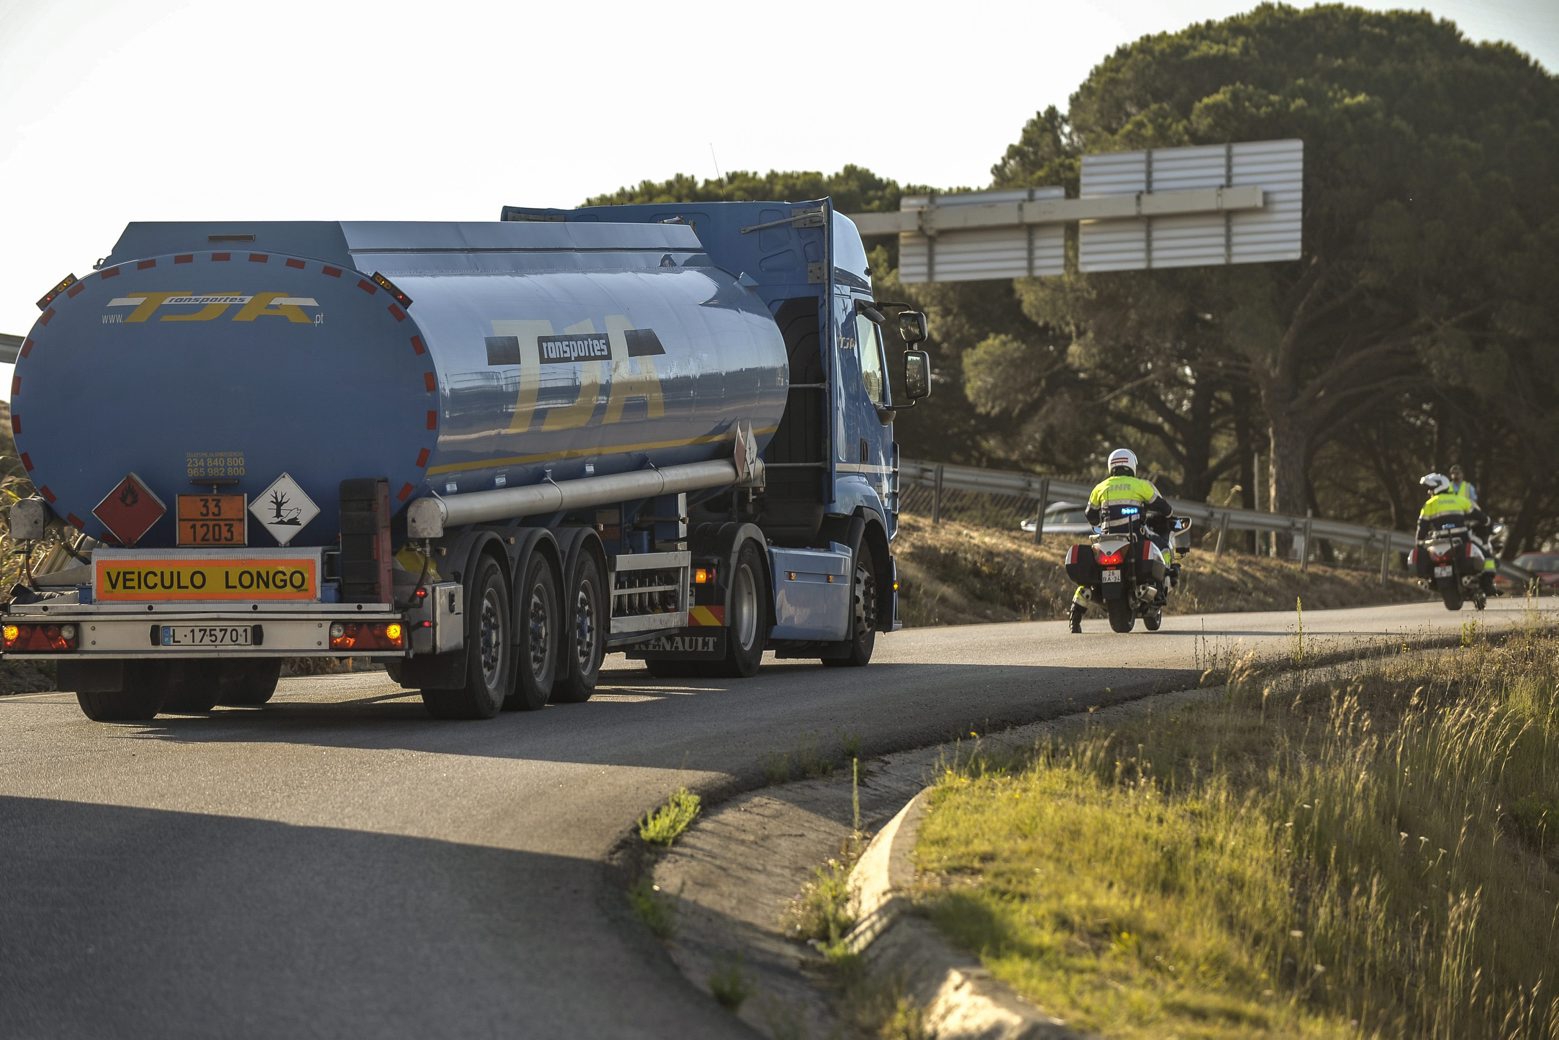 epa07769540 Members of the National Republican Guard (GNR) gendarmerie force escort a truck carrying fuel outside the headquarters of the Logistics Fuel Company (CLC) in Aveiras de Cima, Portugal, 12 August 2019, during the indefinite strike of dangerous goods drivers. The Portuguese government has decreed minimum services between 50 percent and 100 percent, and declared an energy crisis. The move implies 'exceptional measures' to minimize the impact of the strike of dangerous goods drivers in order to guarantee the supply of essential services such as security forces and medical emergency.  EPA/CARLOS BARROSO